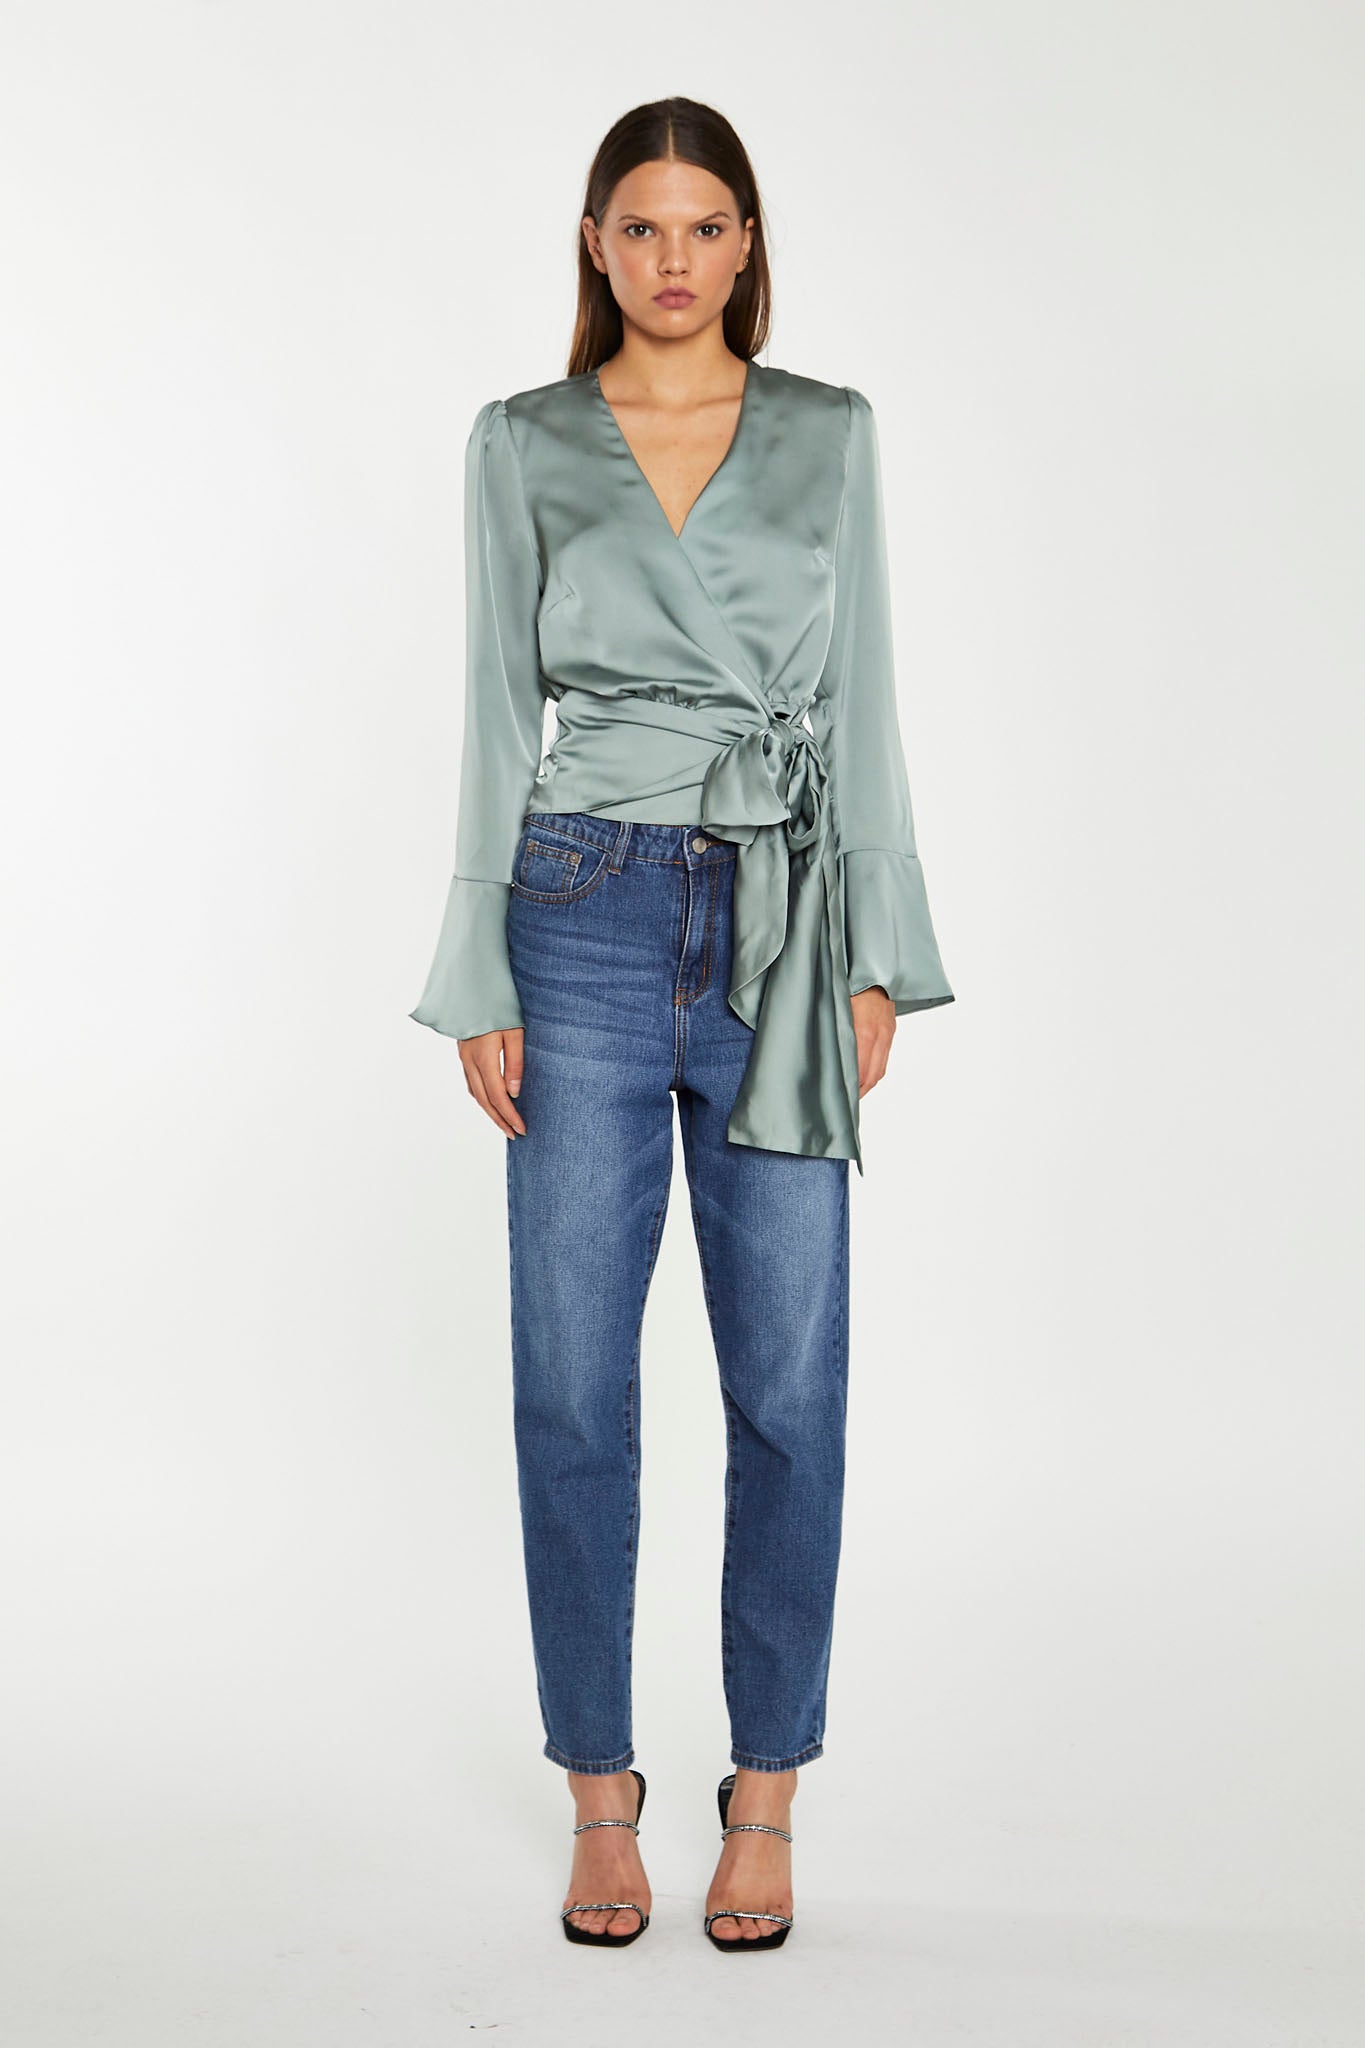 Dusty-Green Satin Wrap Front Blouse